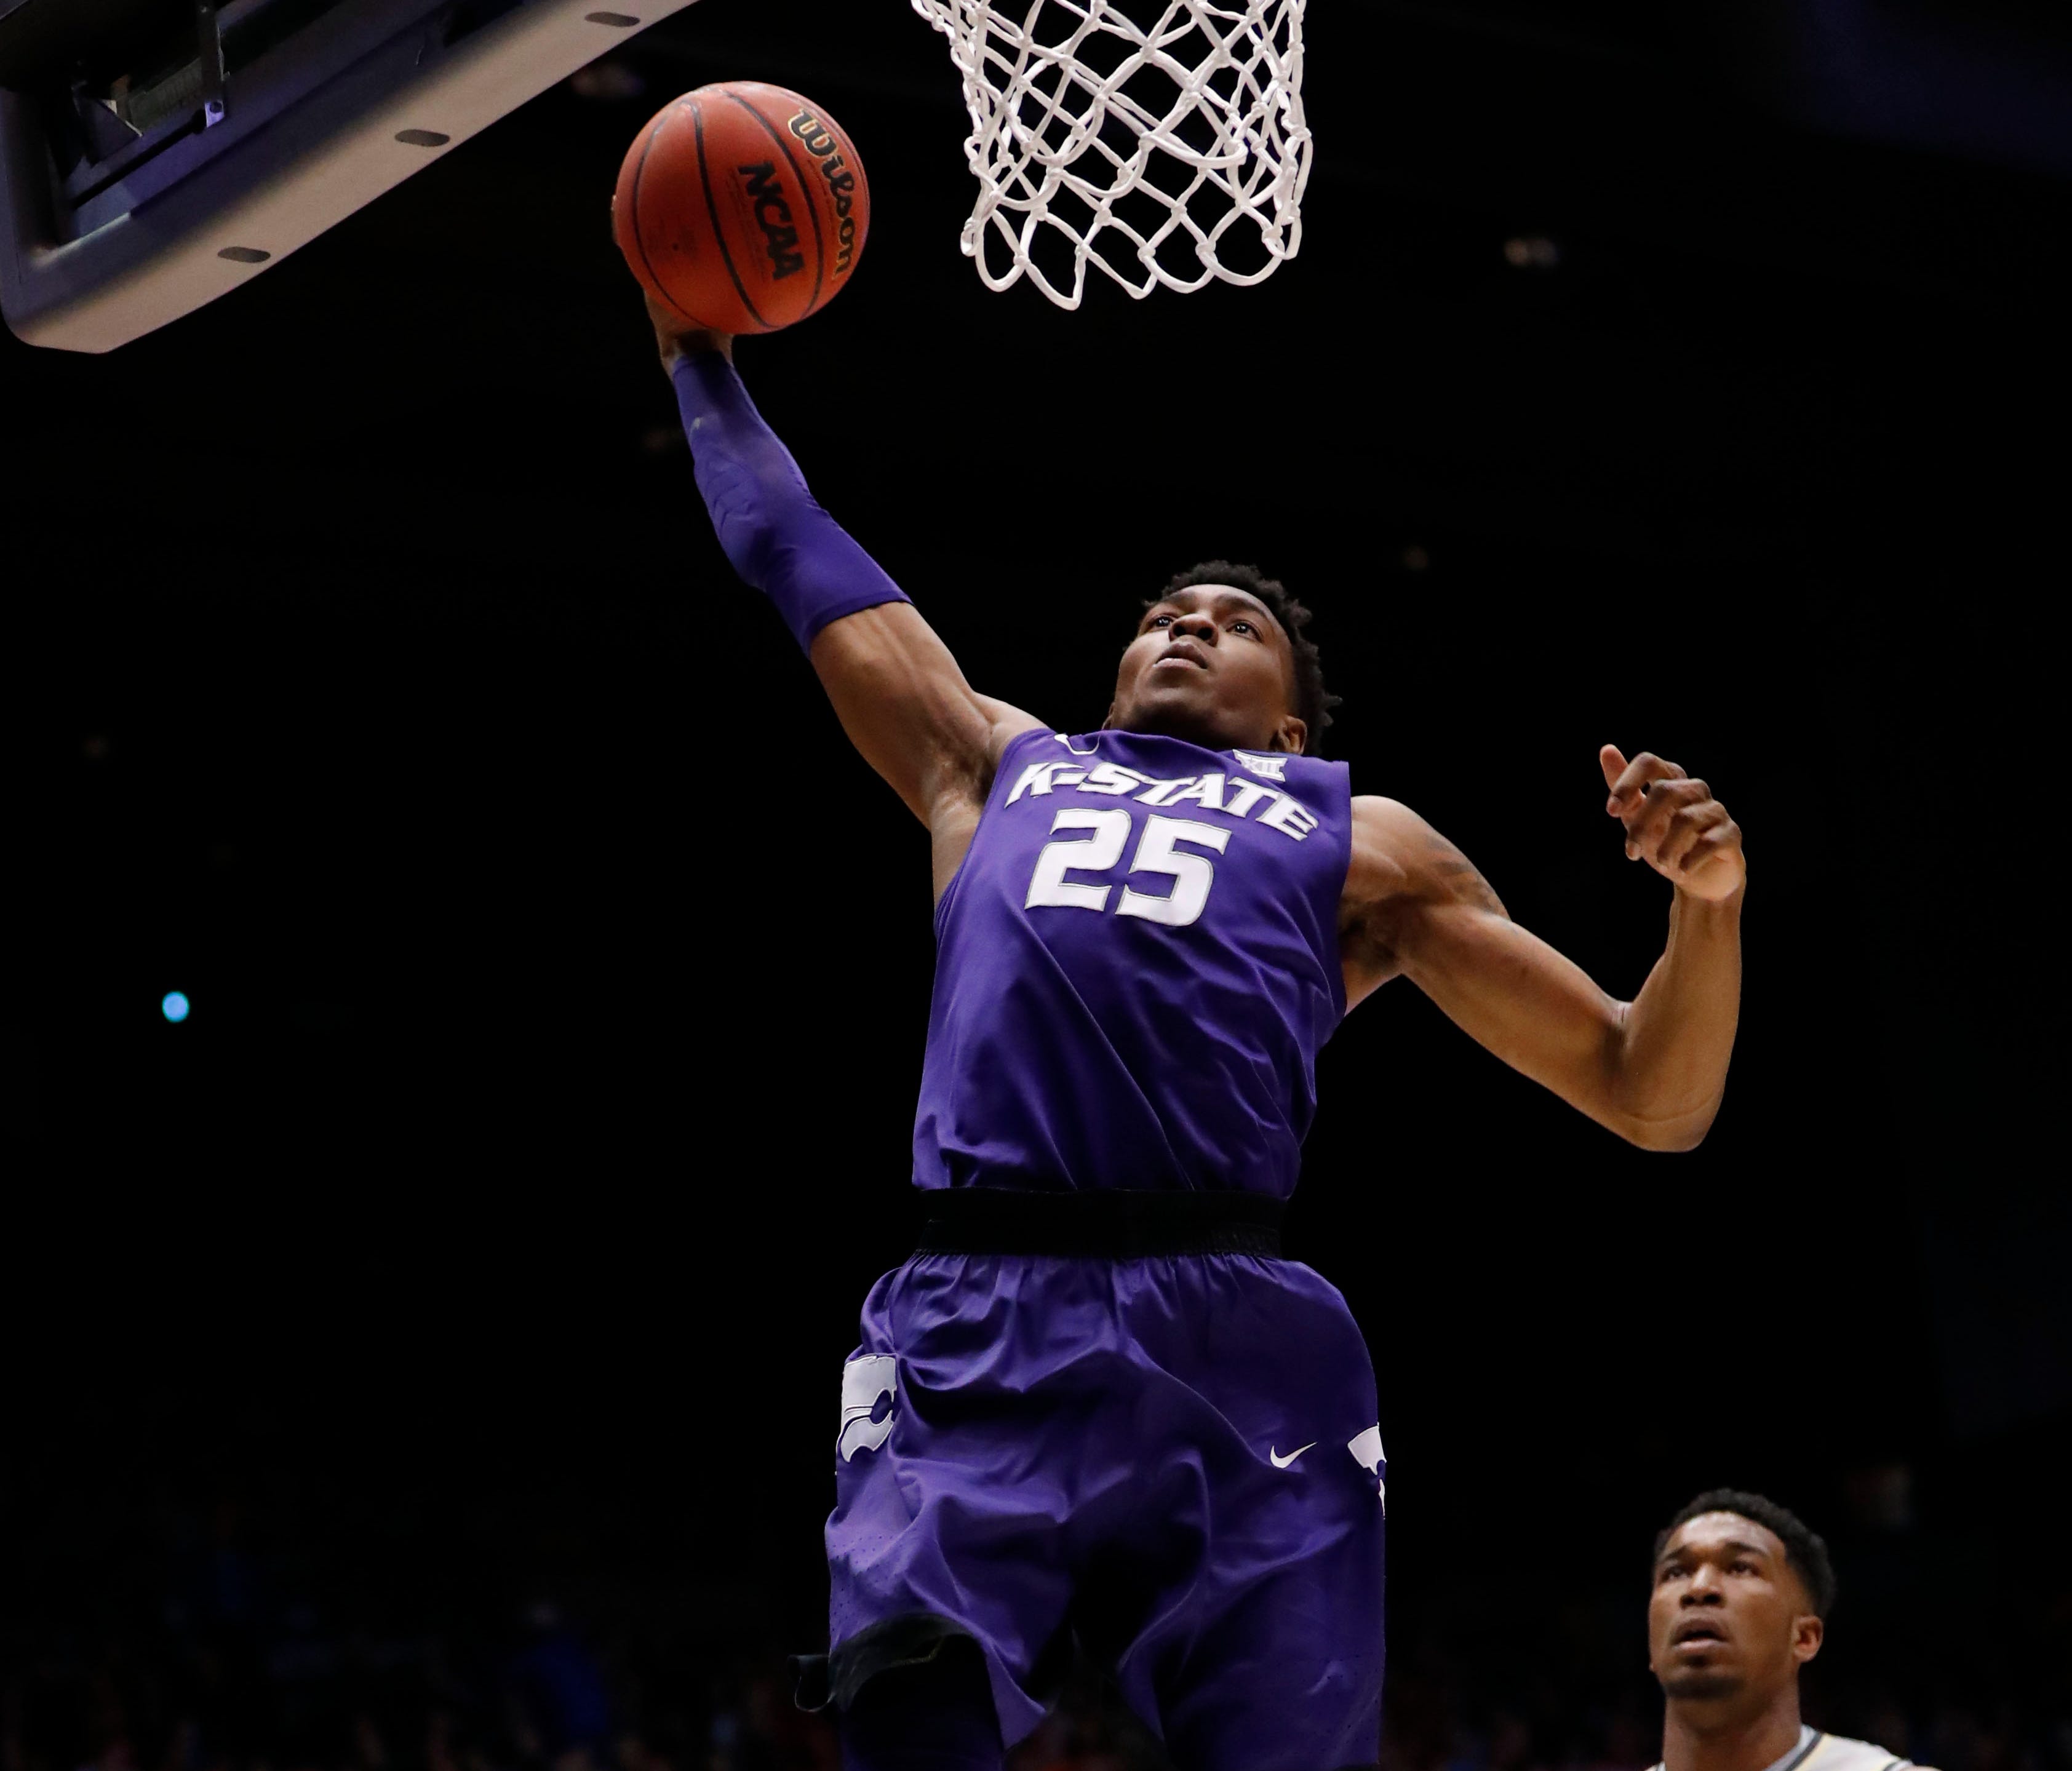 Kansas State Wildcats forward Wesley Iwundu (25) goes to the basket in the first half against the Wake Forest Demon Deacons in the first four of the 2017 NCAA Tournament at Dayton Arena.